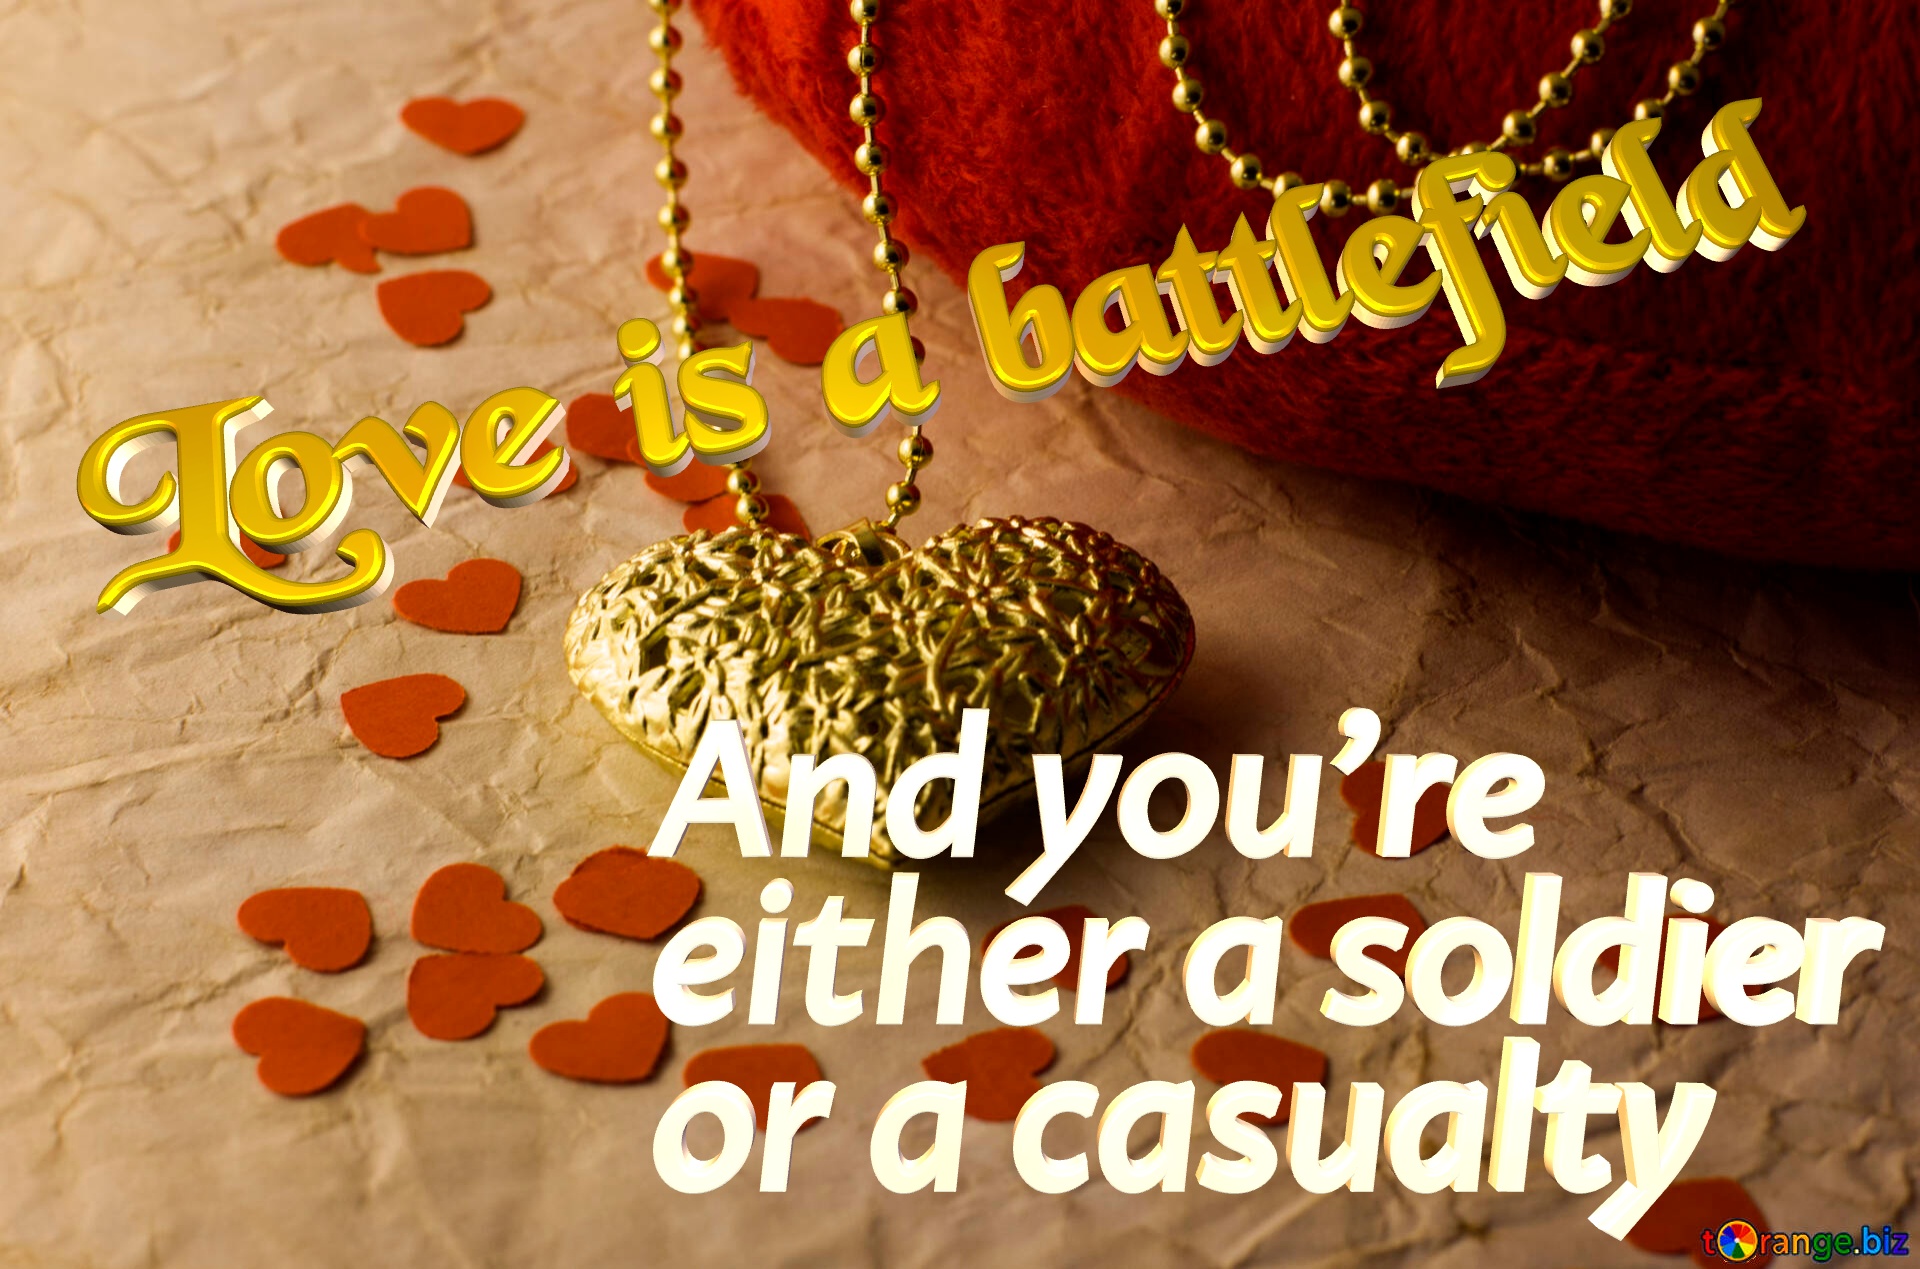 Love is a battlefield And you’re  either a soldier  or a casualty  Souvenir for your favorite №17562